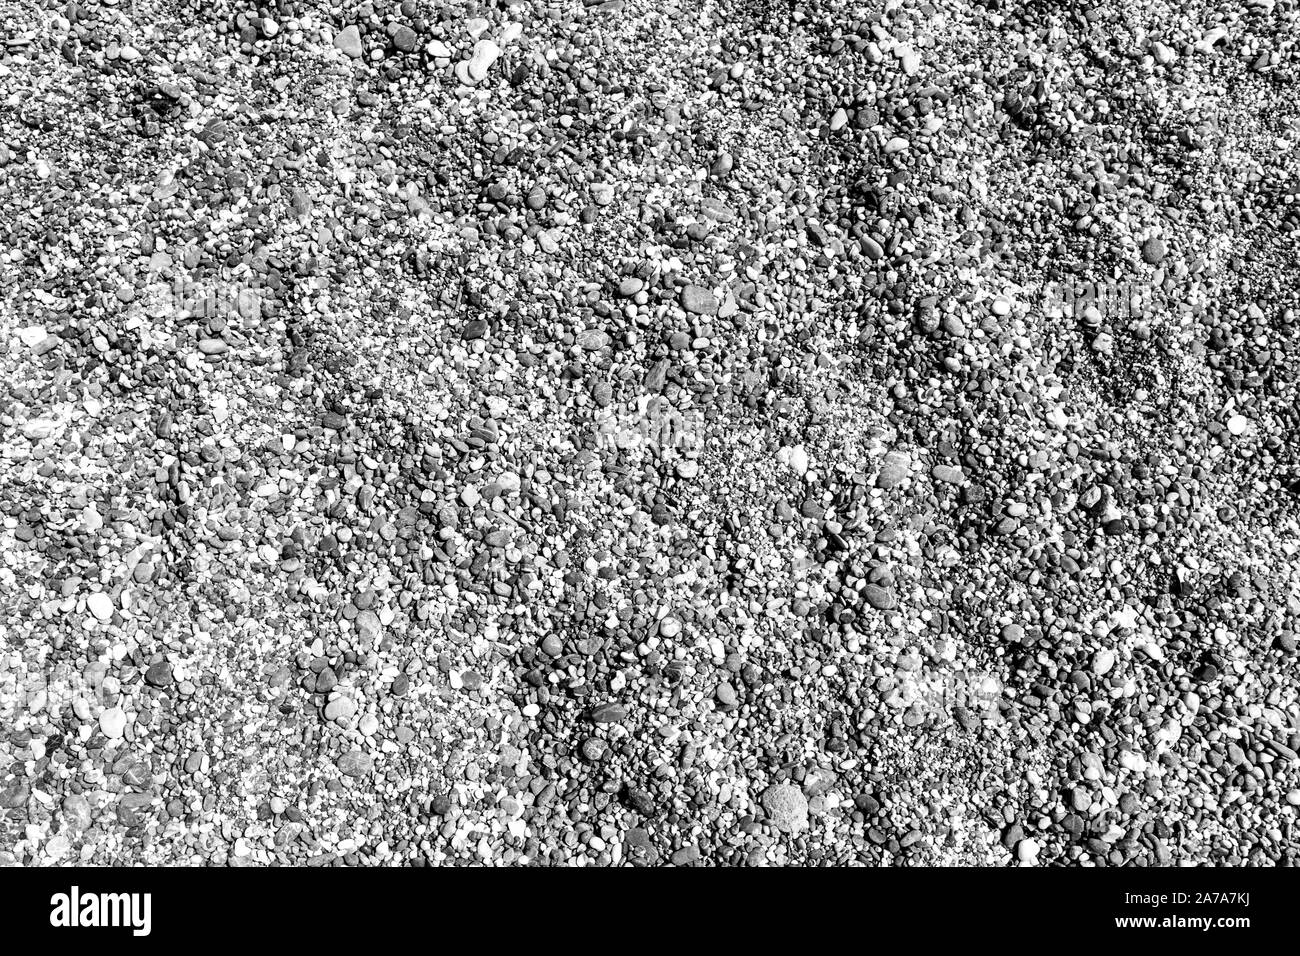 Sandy beach background. Detailed sand or gravel texture. Stock Photo